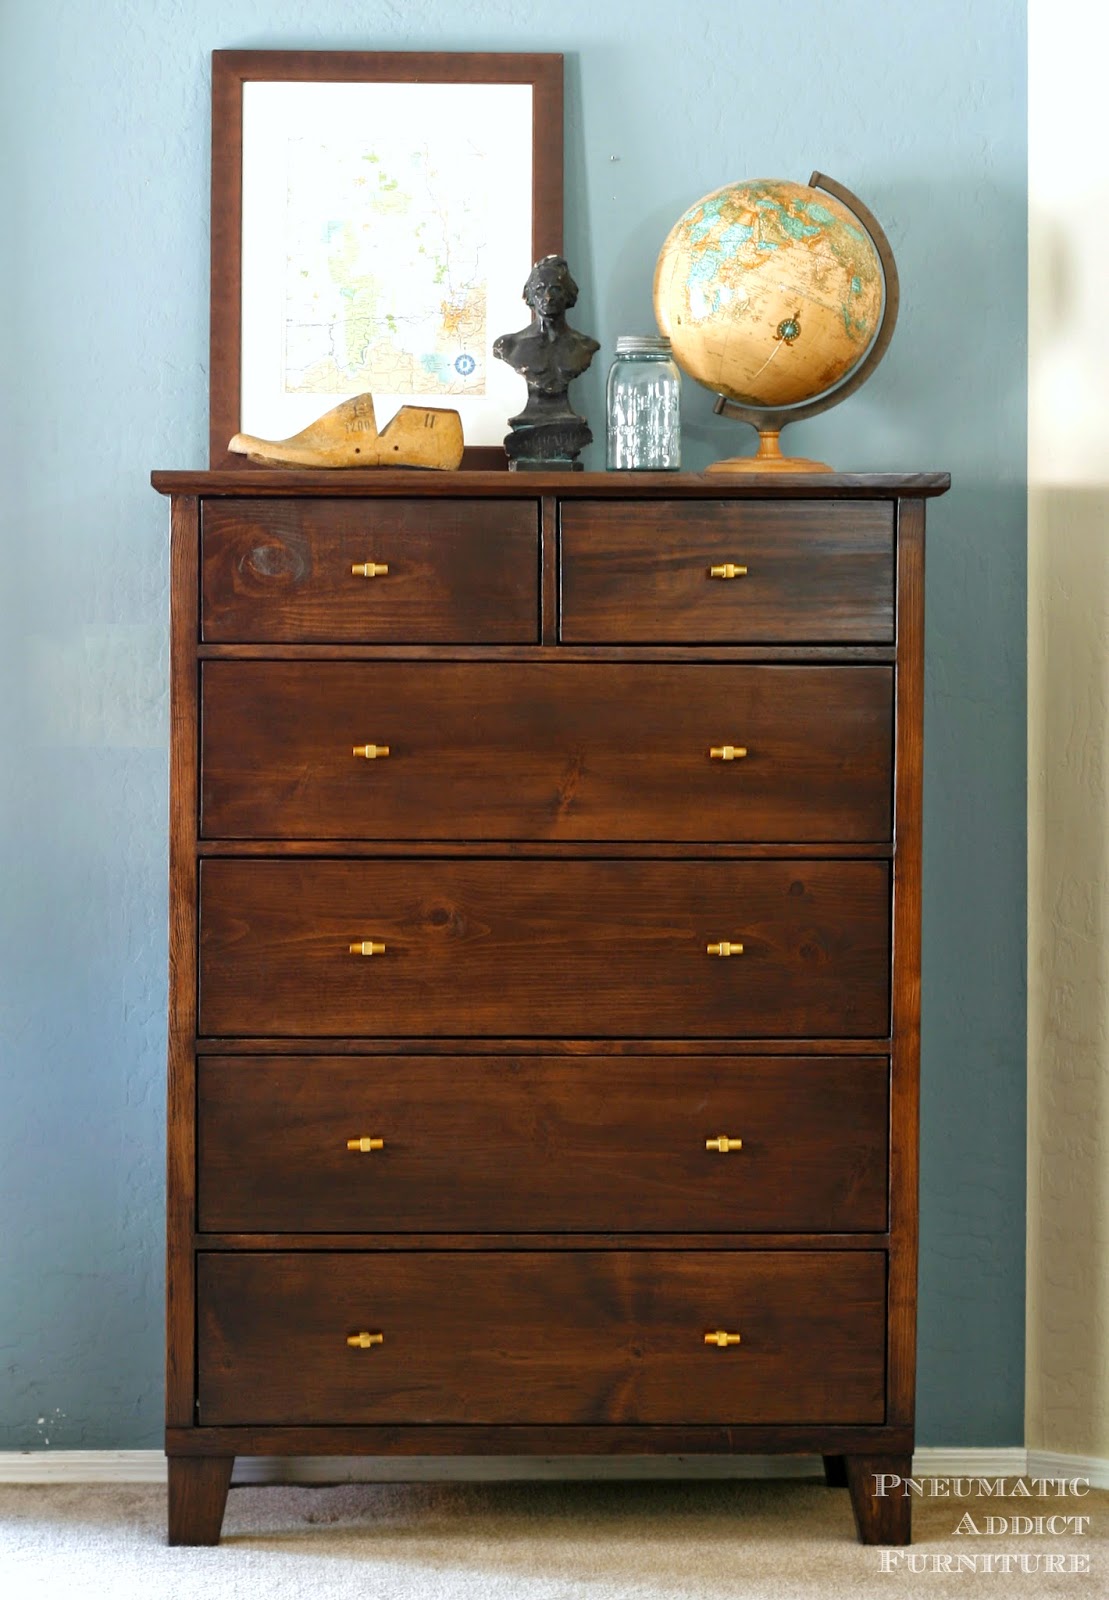 Learn to build your own PB knock-off, tall dresser. 